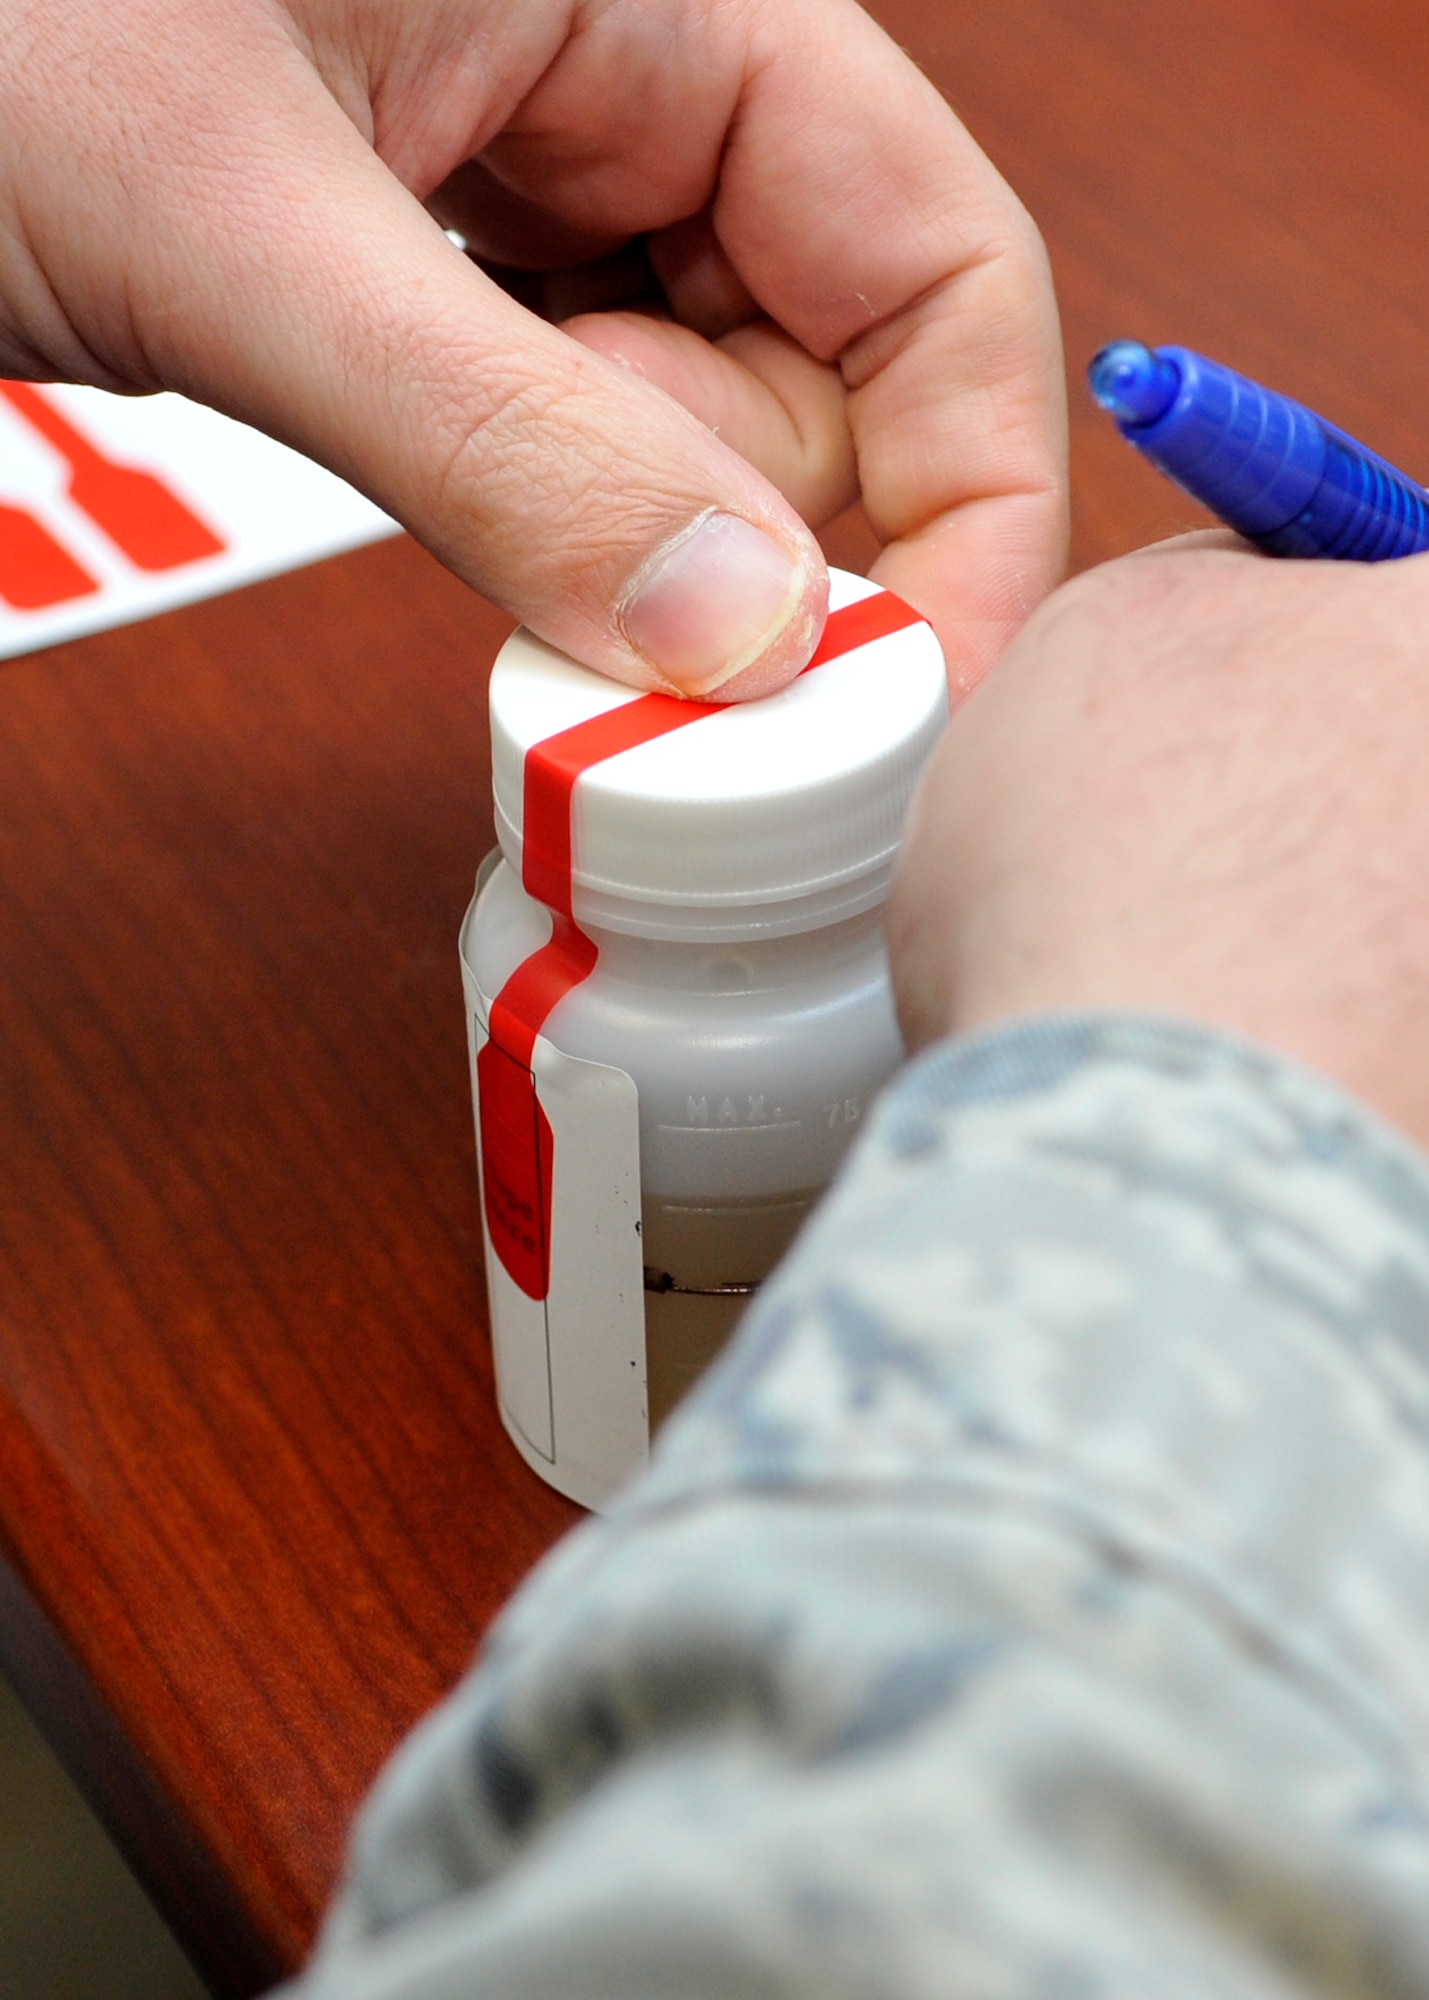 Drug testing: What's fact or myth? > Luke Air Force Base > Article